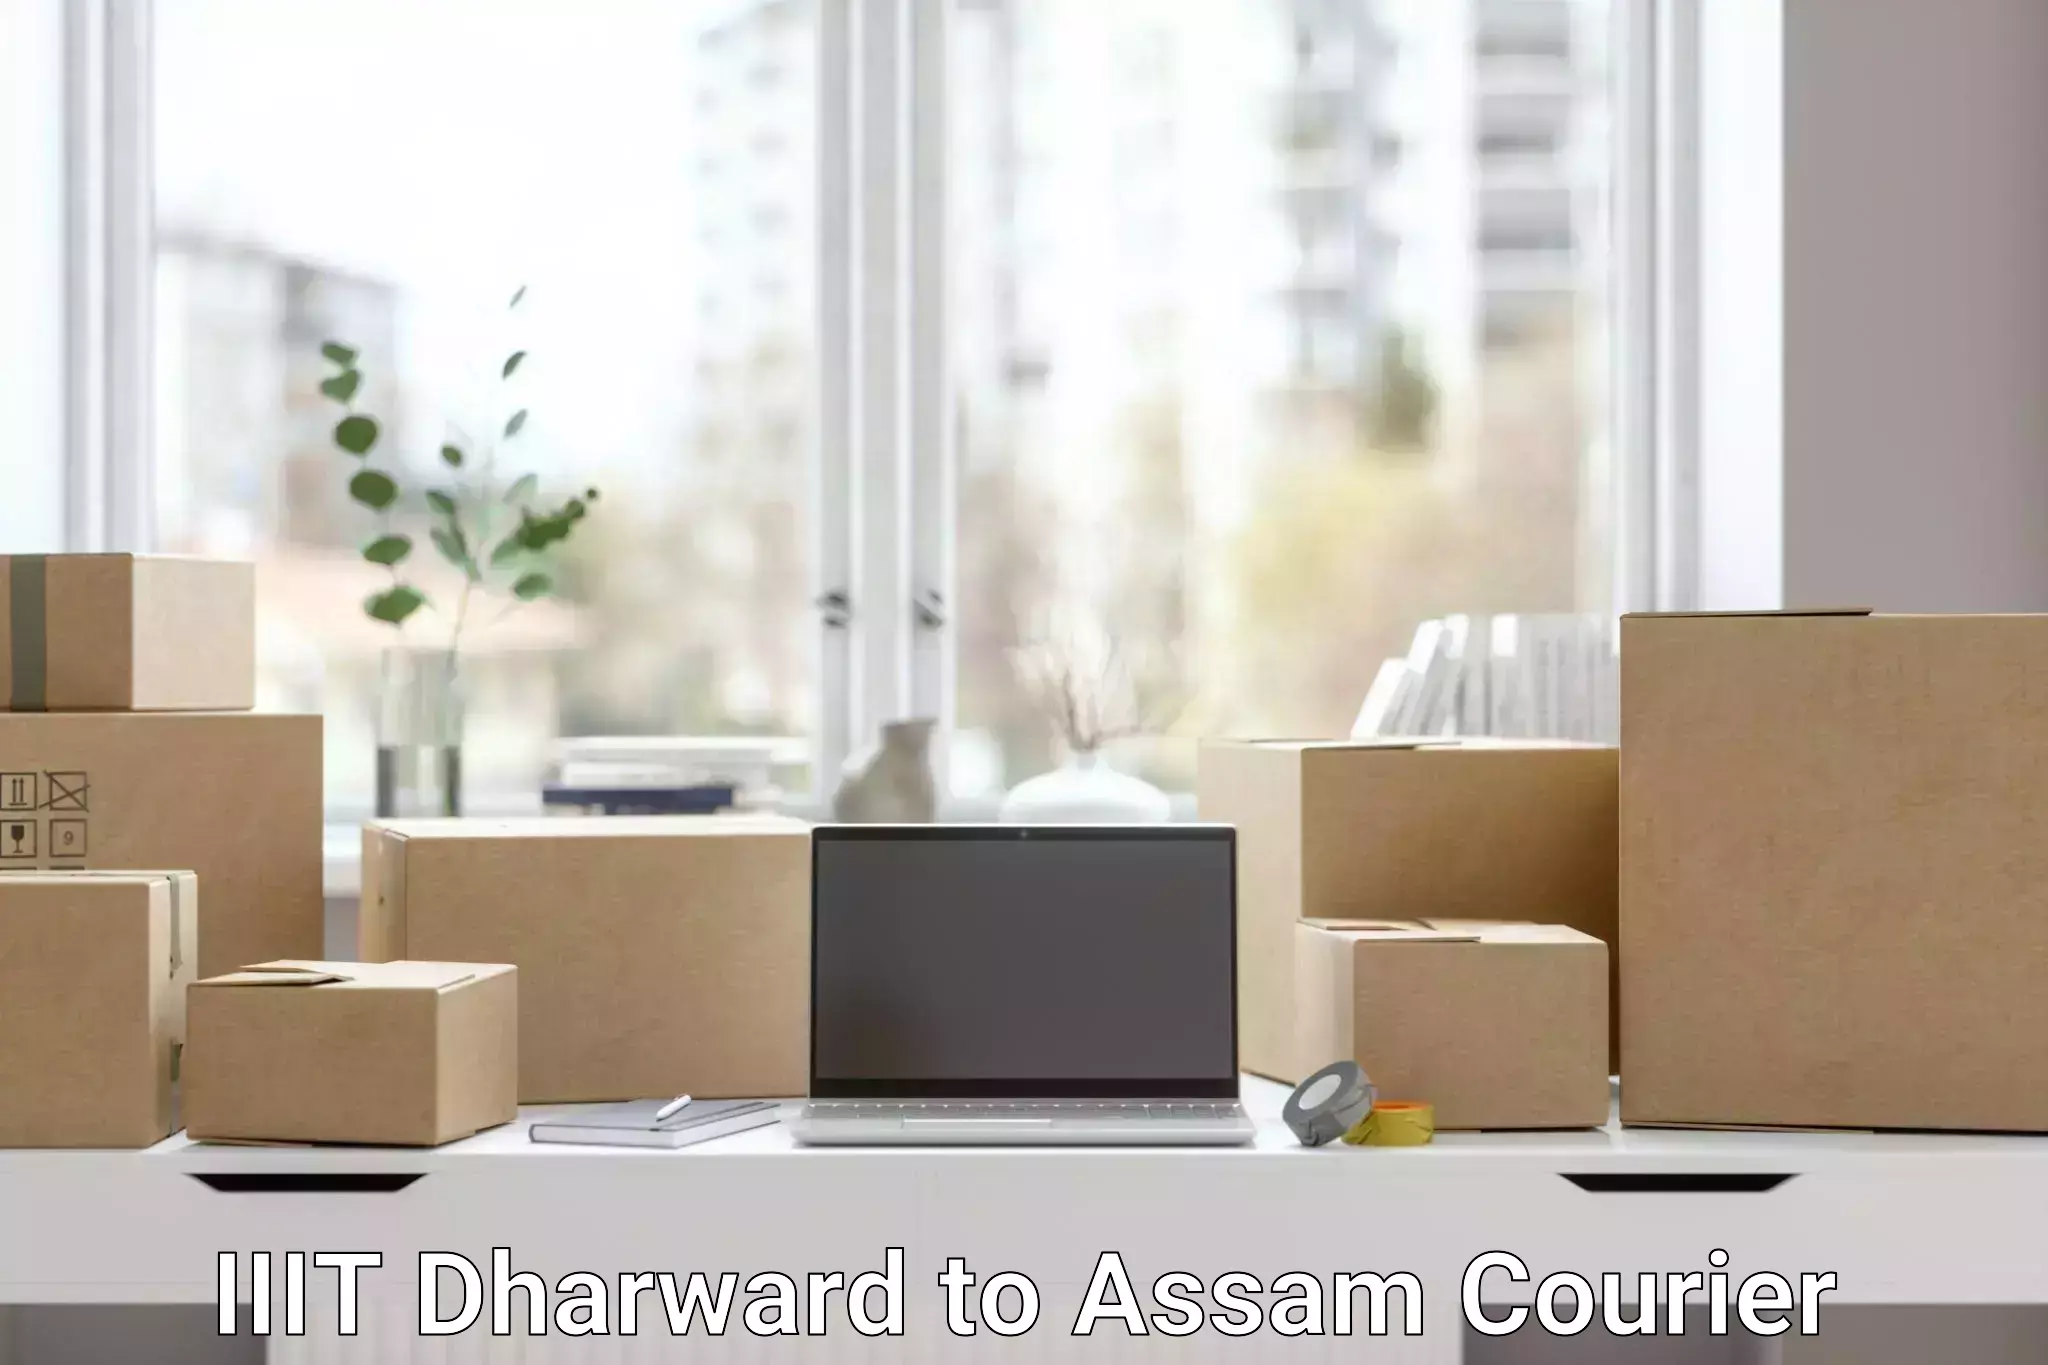 Global shipping networks IIIT Dharward to Assam